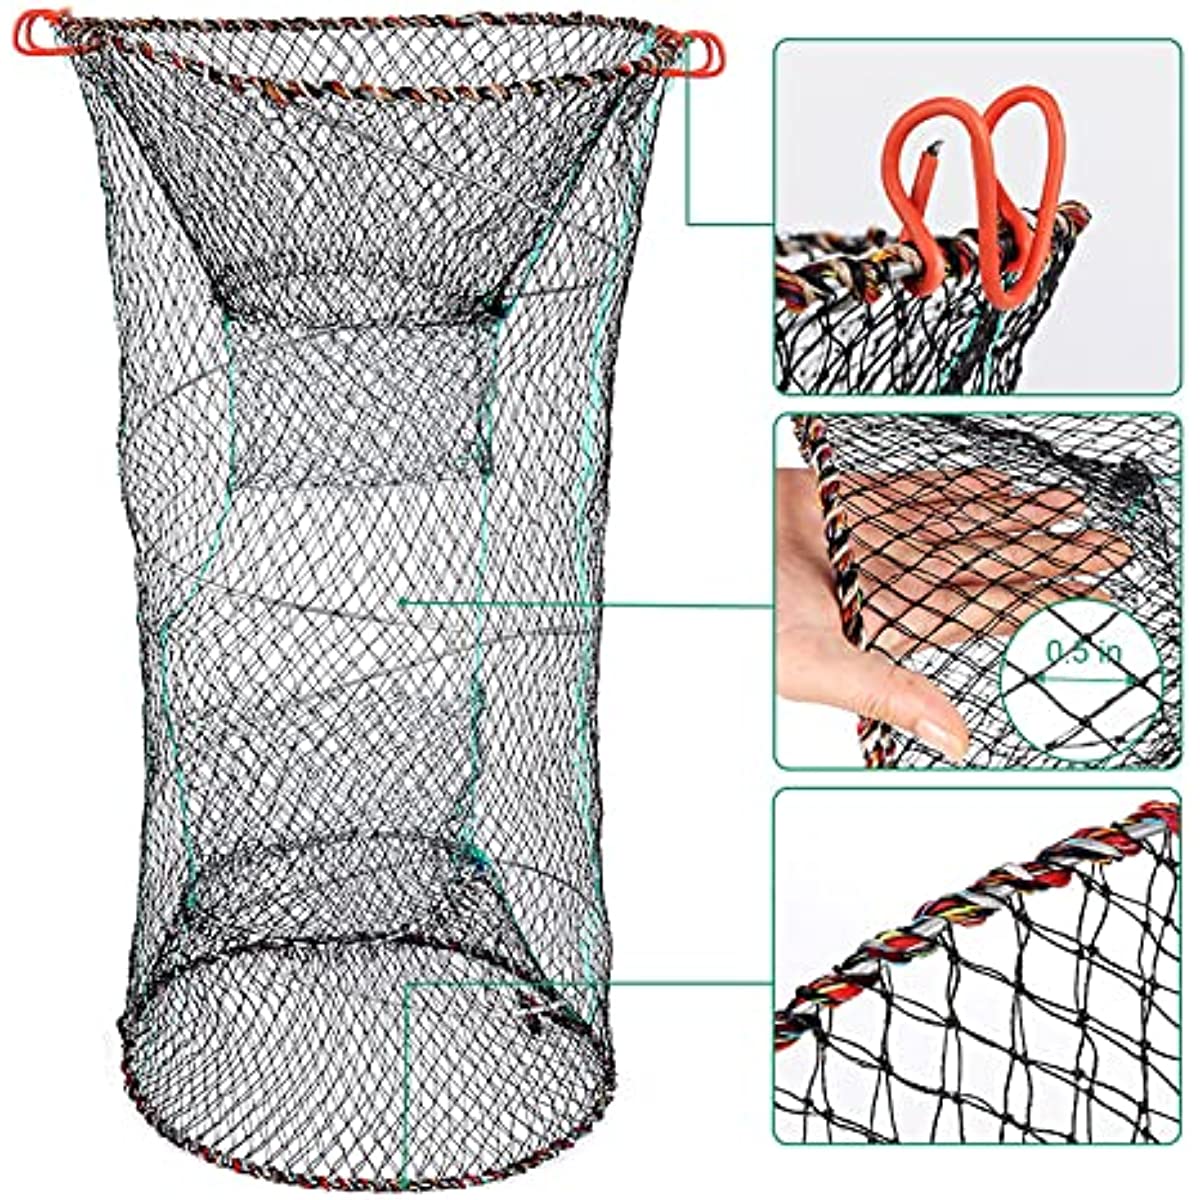 SET OF 4 CRAB DROP NETS WITH BAIT HOLDER & 11M ROPE FISH CRAYFISH